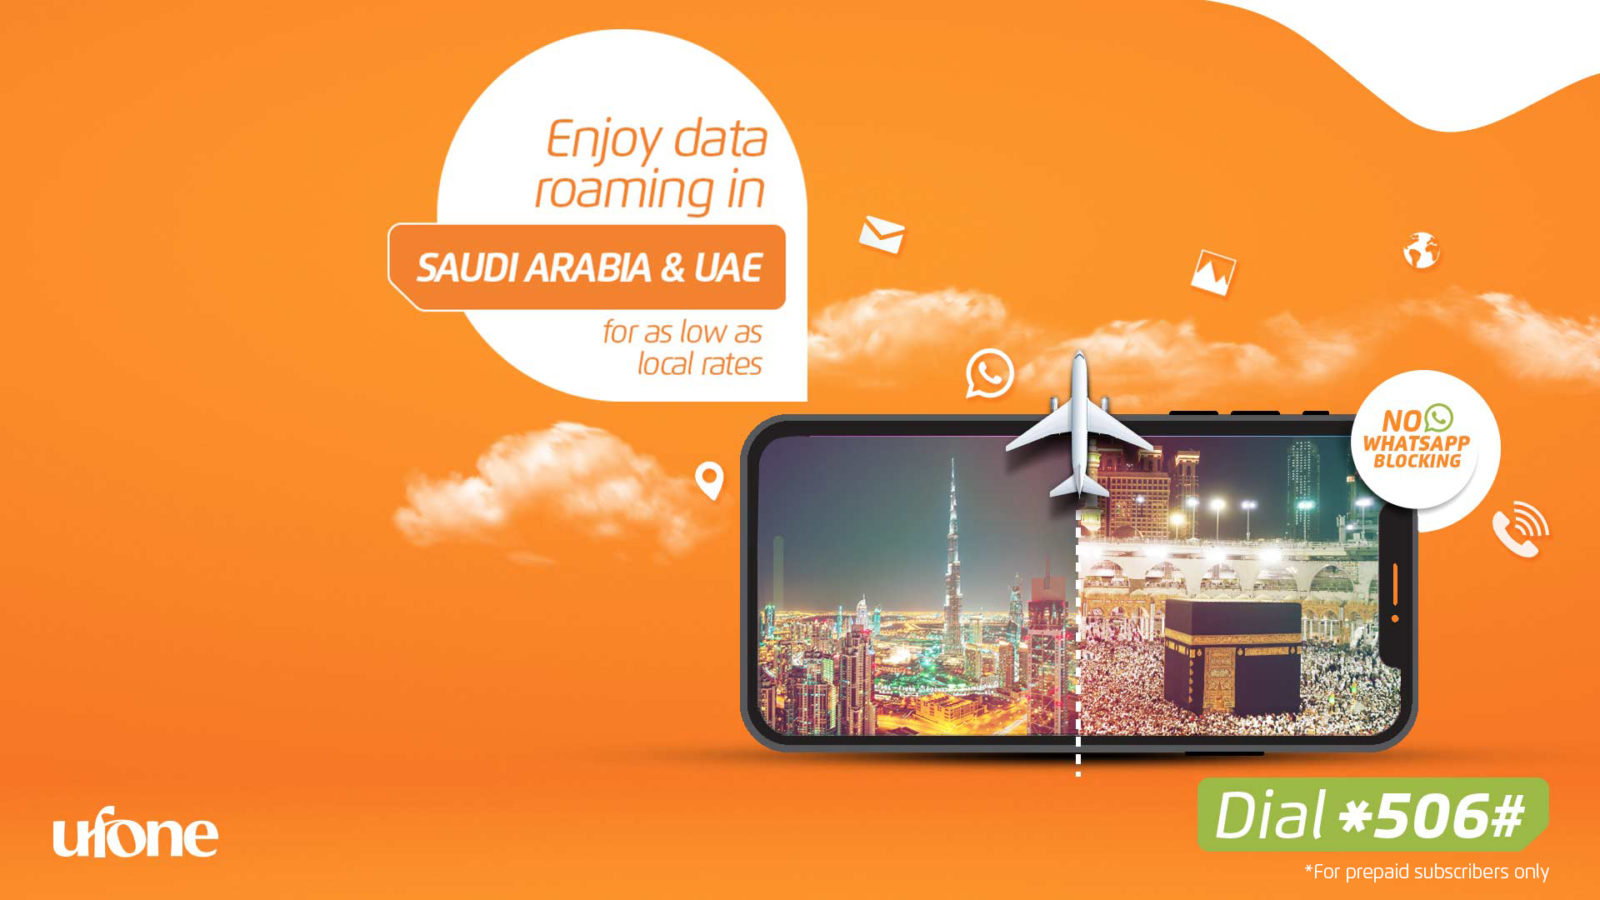 Ufone Offers Affordable Data Packages &amp; Whatsapp Access serapportantà Mobily Postpaid 3 Sim Packages